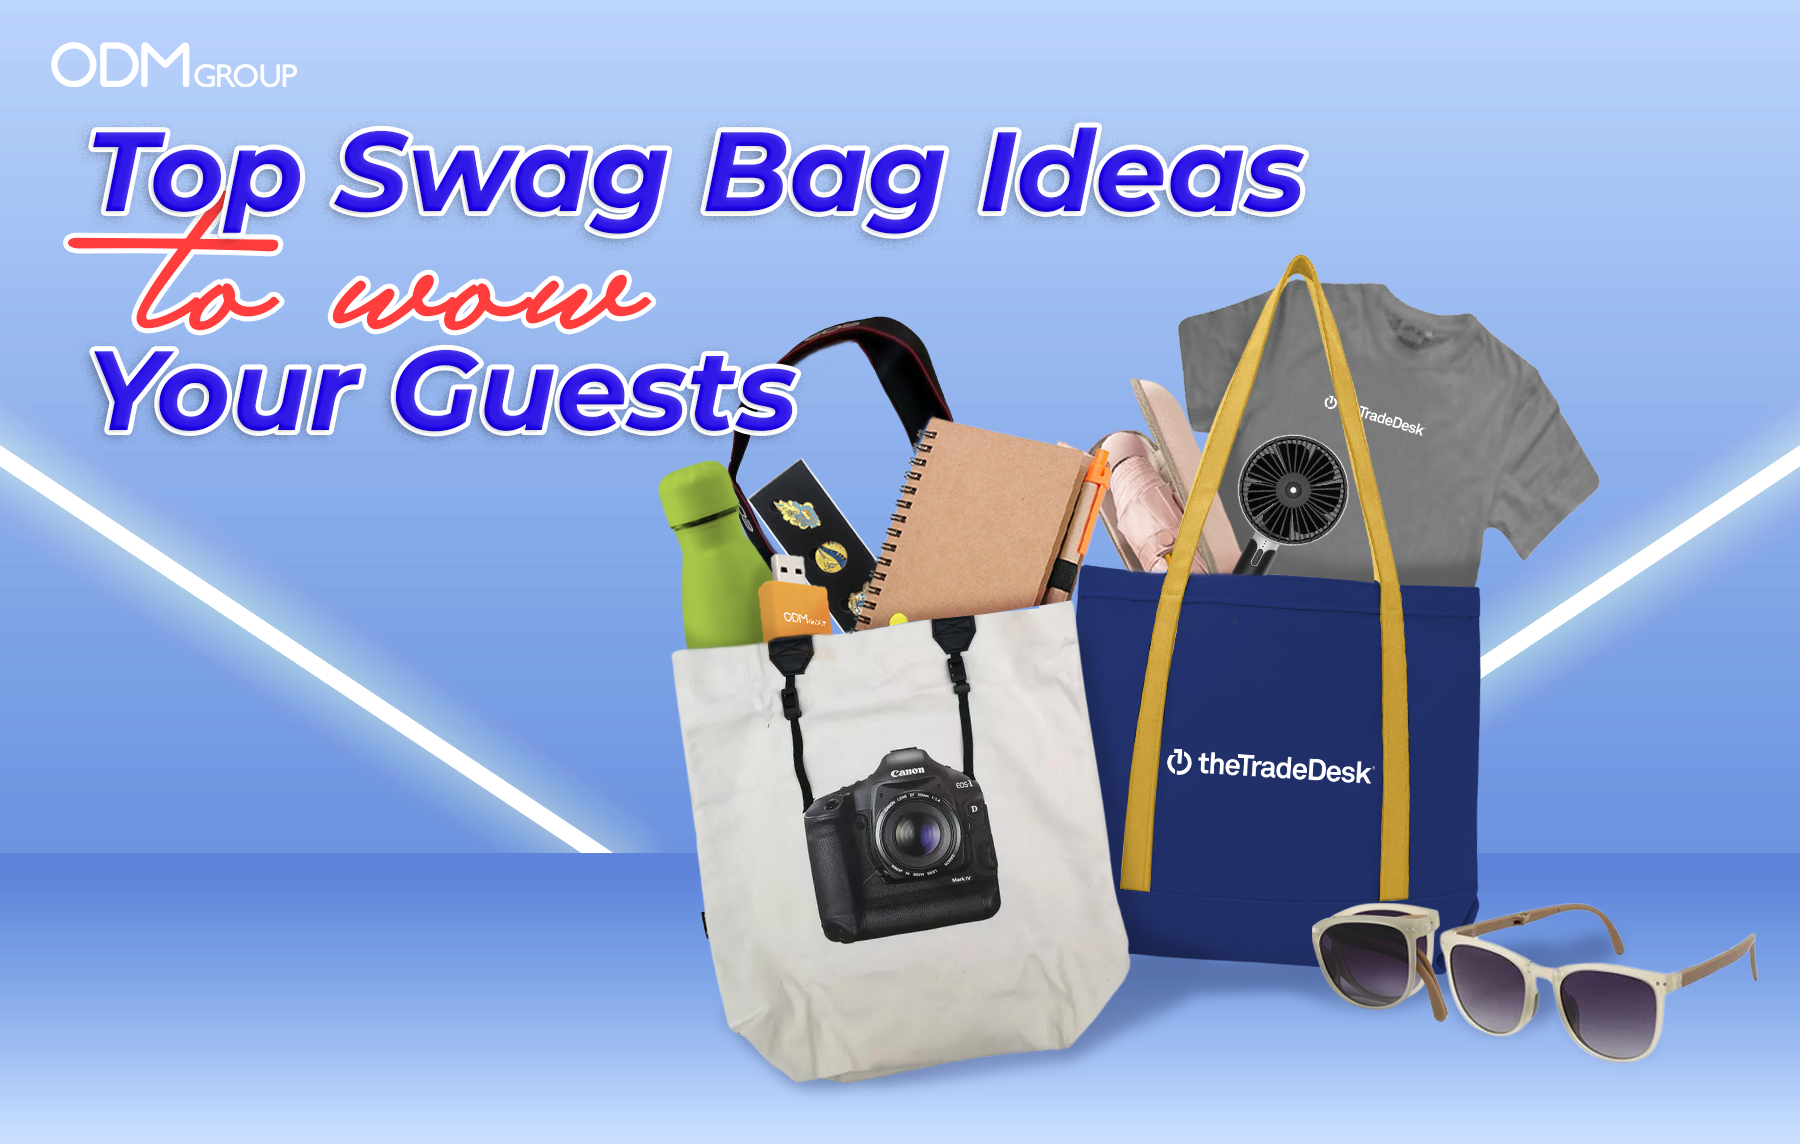 Top swag bag ideas to wow guests